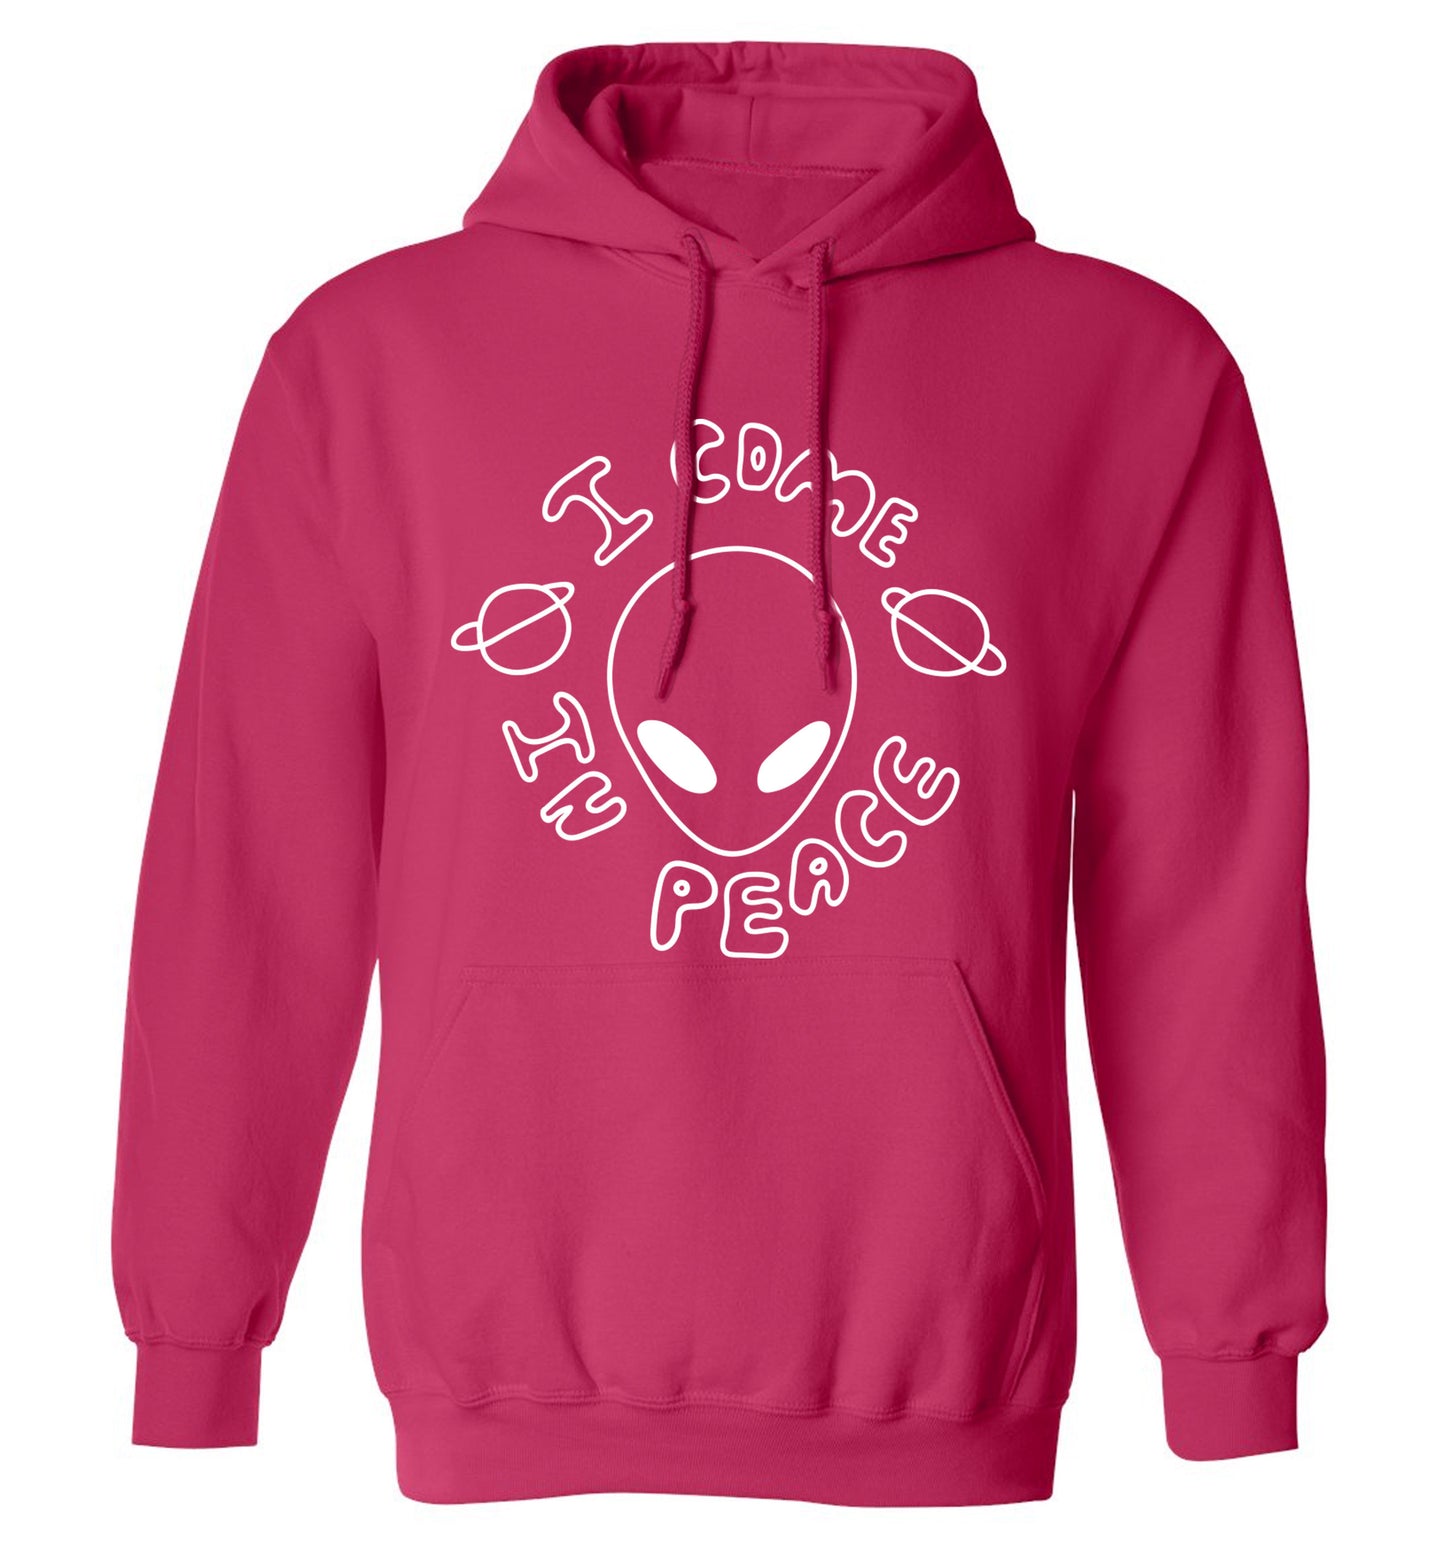 I come in peace adults unisex pink hoodie 2XL